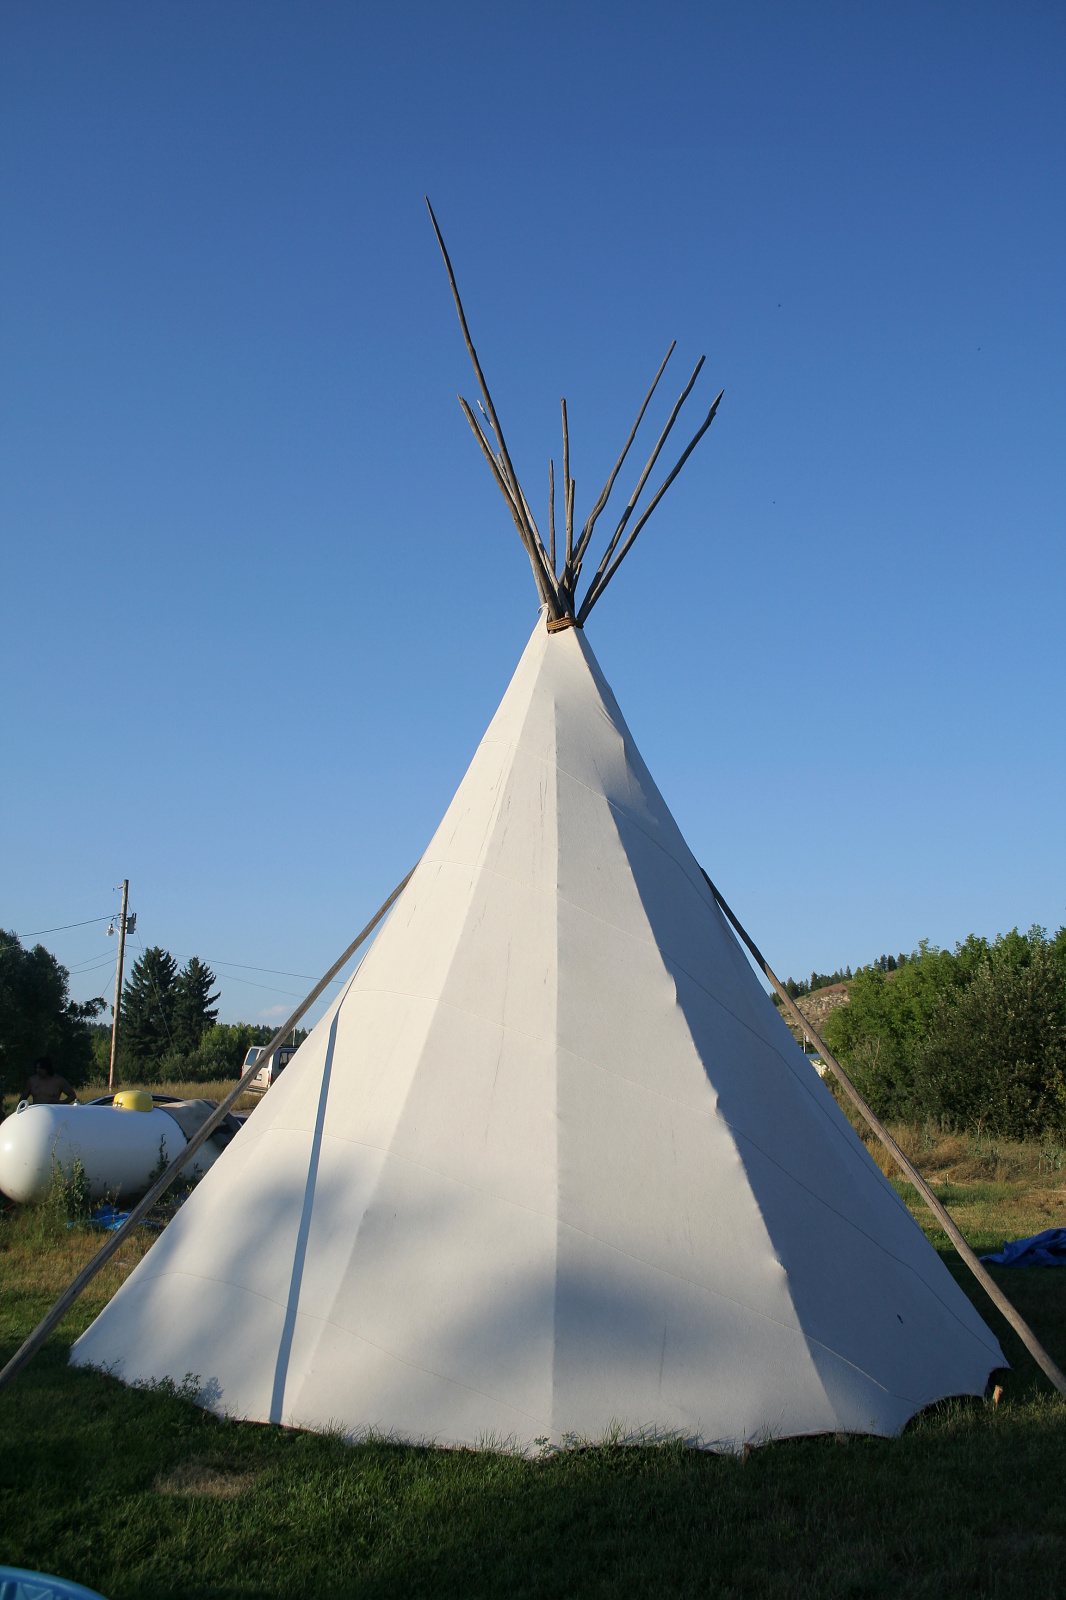 Rufus' Tipi (Travels » US Trip 1: Cheyenne Country » Teepees)